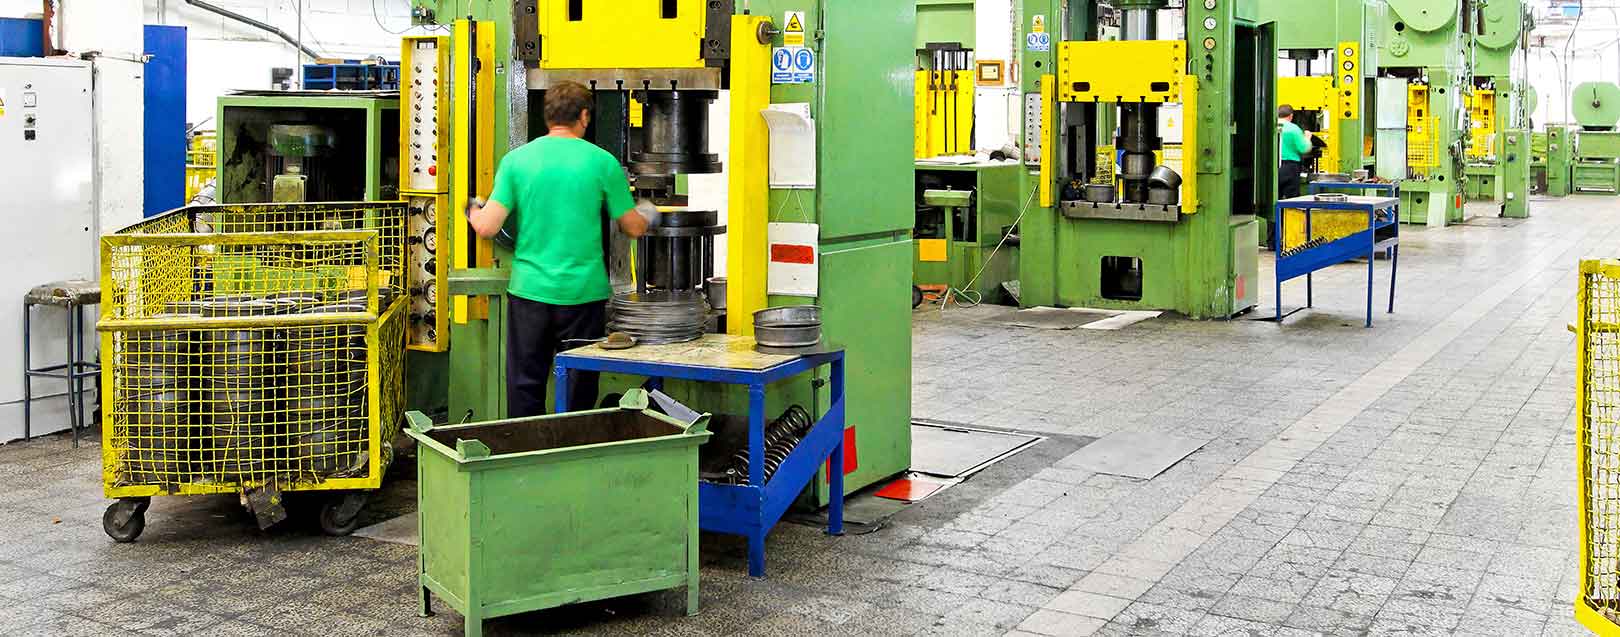 Industrial output growth down to 0.1% in March